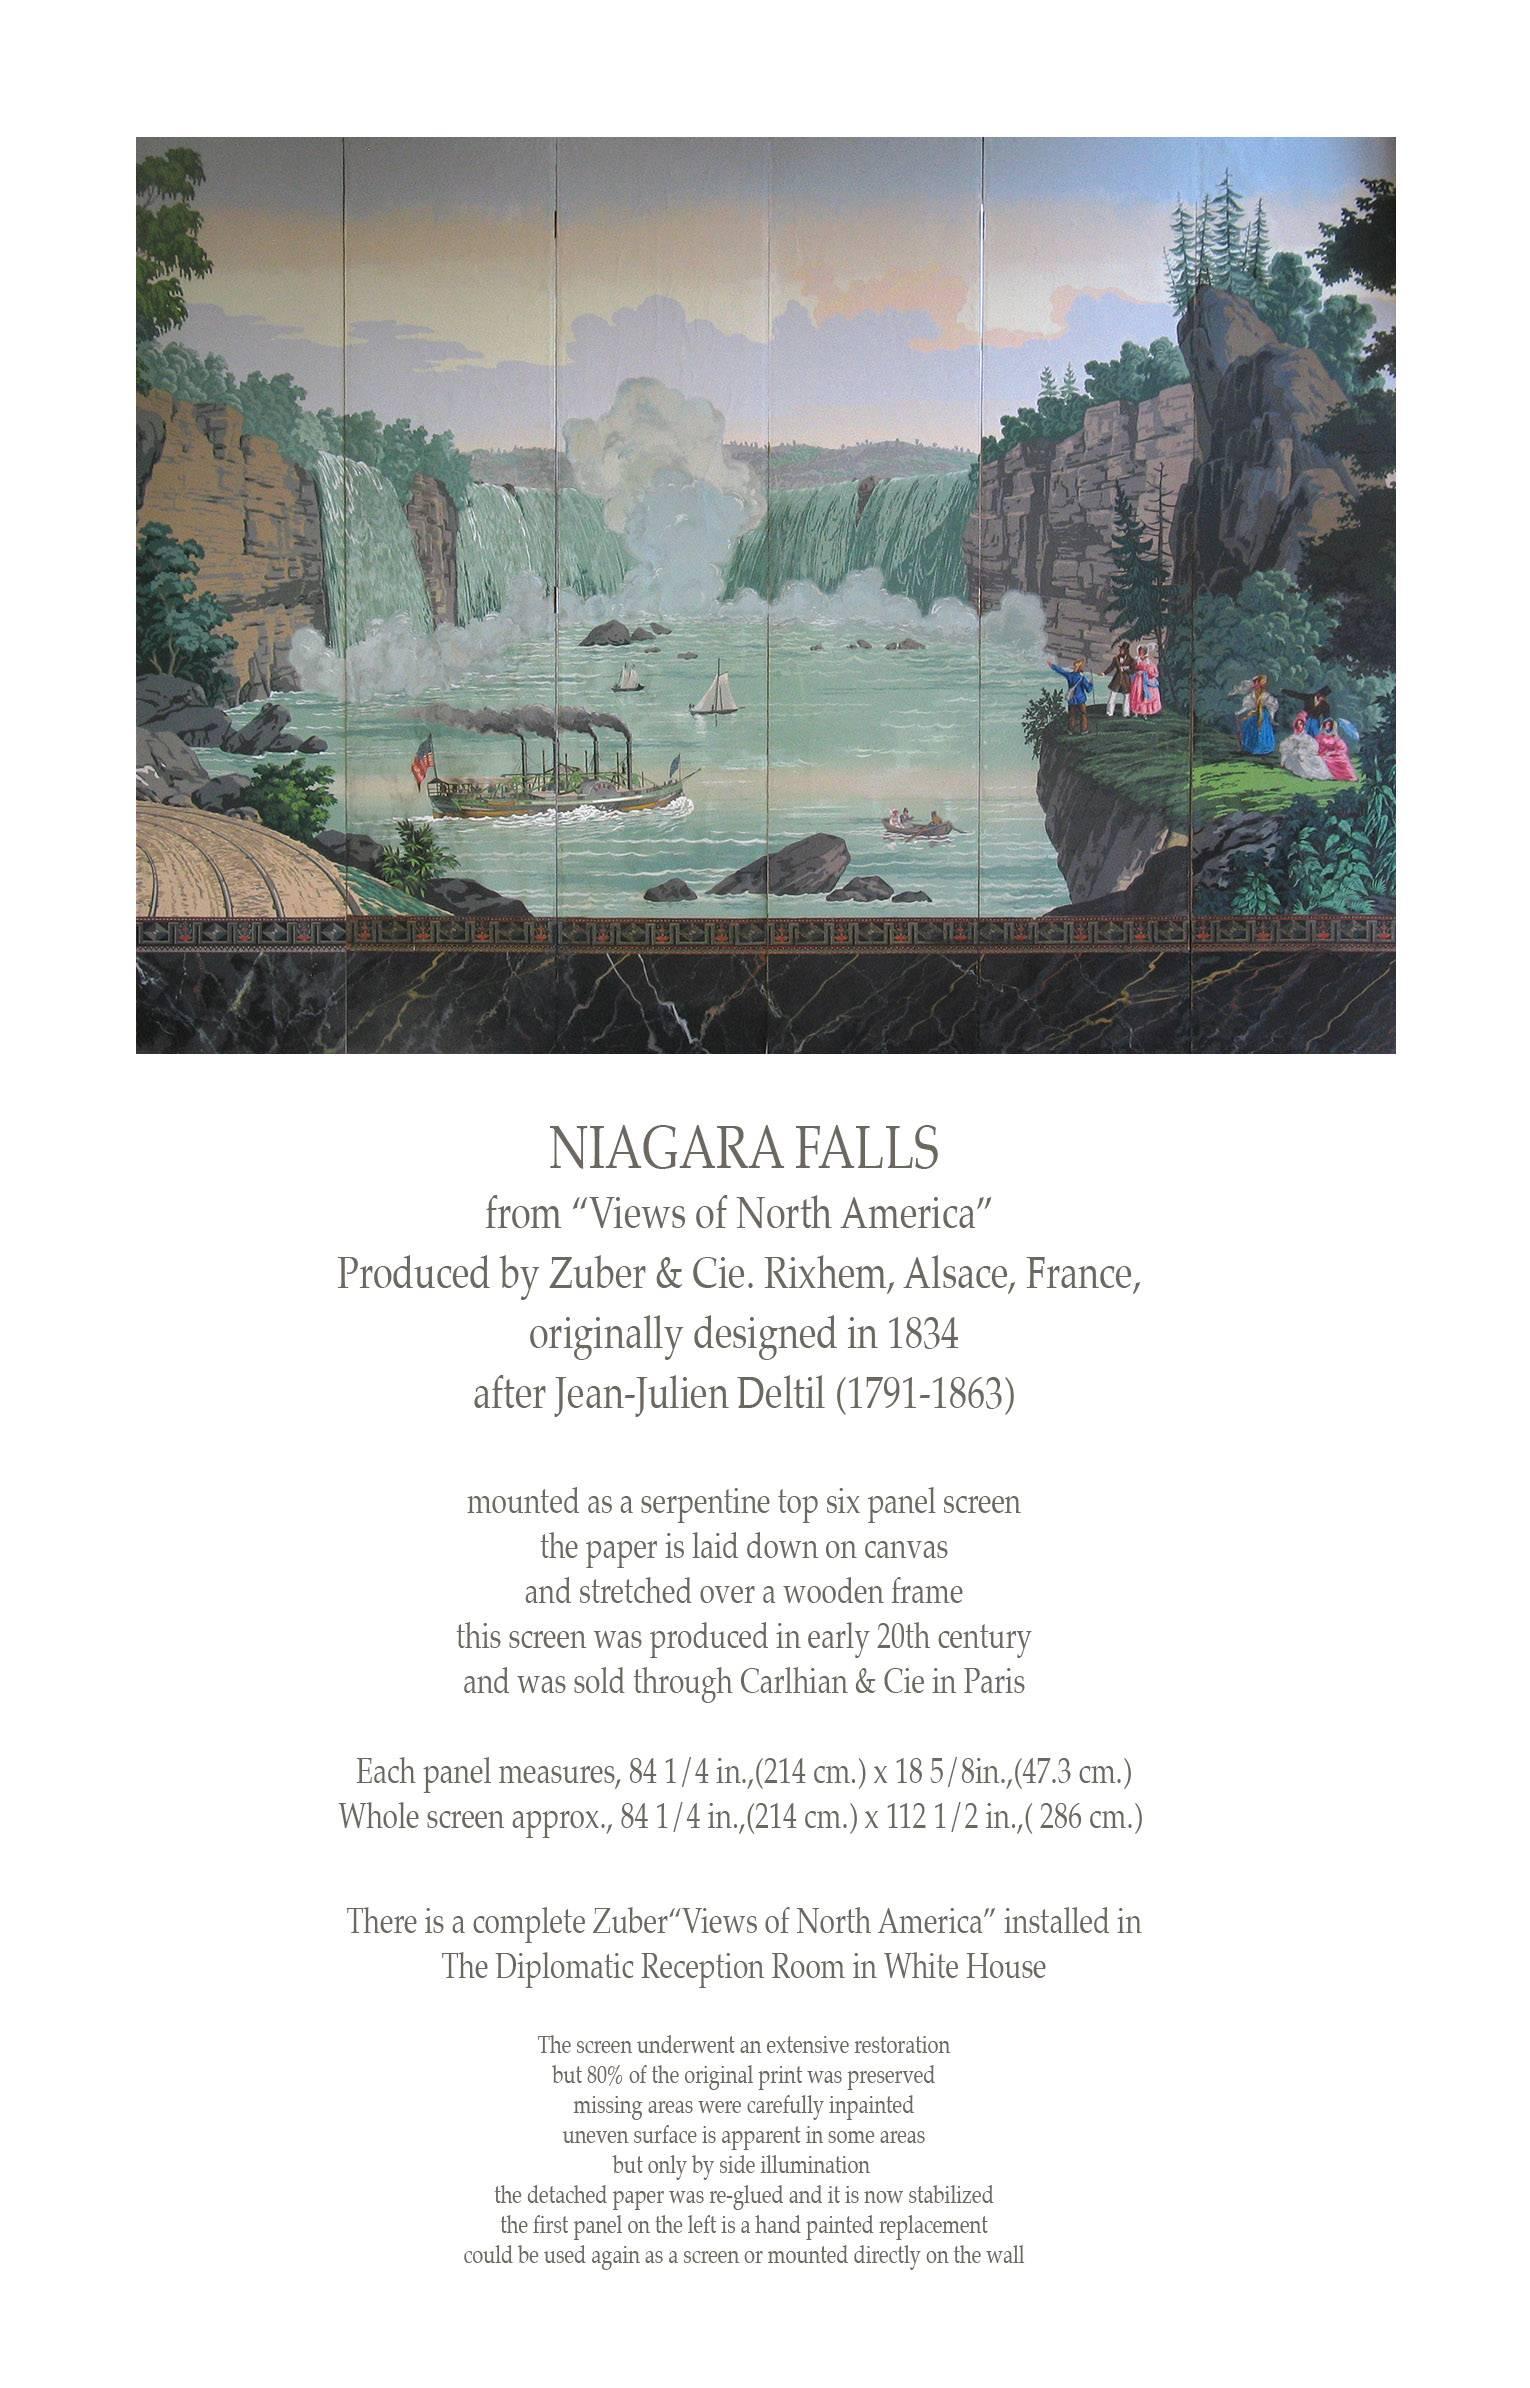 Niagara Falls from "Views of North America" Produced by Zuber & Cie. Rixhem, Alsace, France, originally designed in 1834, After Jean-Julien Deltil (1791-1863).
Mounted as a Serpintine top six panel screen, the paper is laid down on